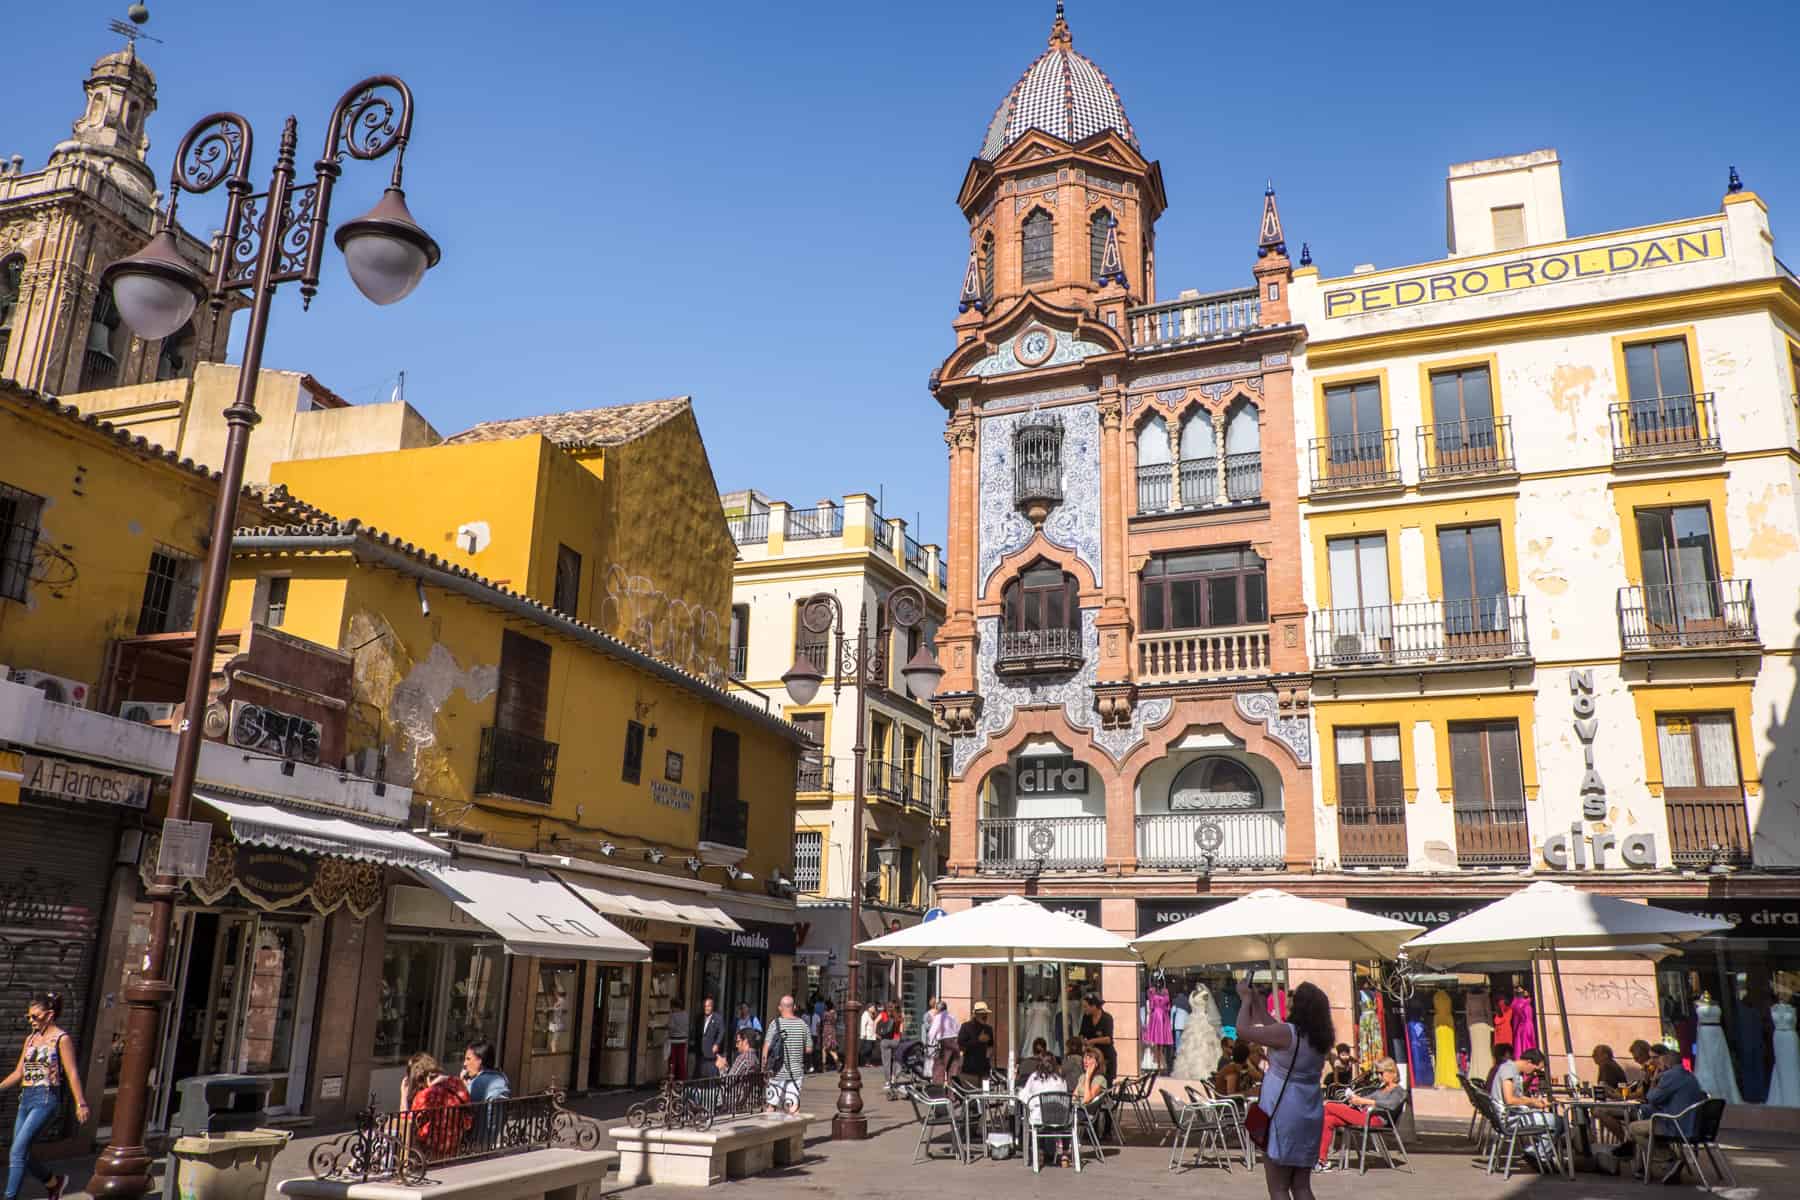 People walking through and sitting under white umbrellas in a public square in Seville Spain. The square is filled with buildings painted bright yellow and vivid salmon pink, vivid in the strong sunlight. 